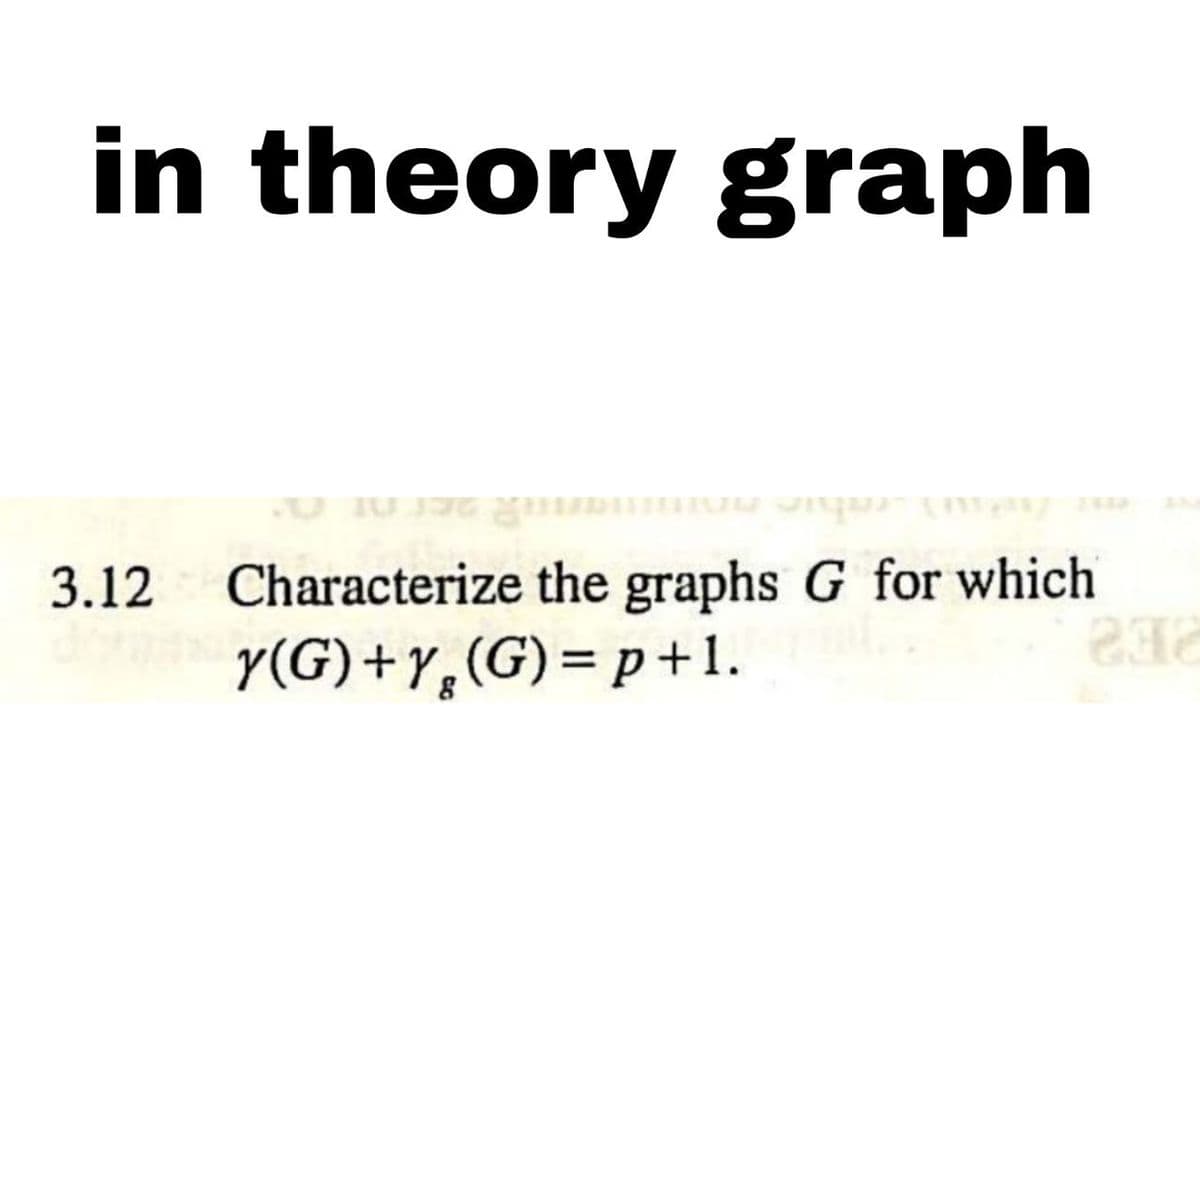 in theory graph
3.12 Characterize the graphs G for which
dowy(G) +y (G)=p+1.
202